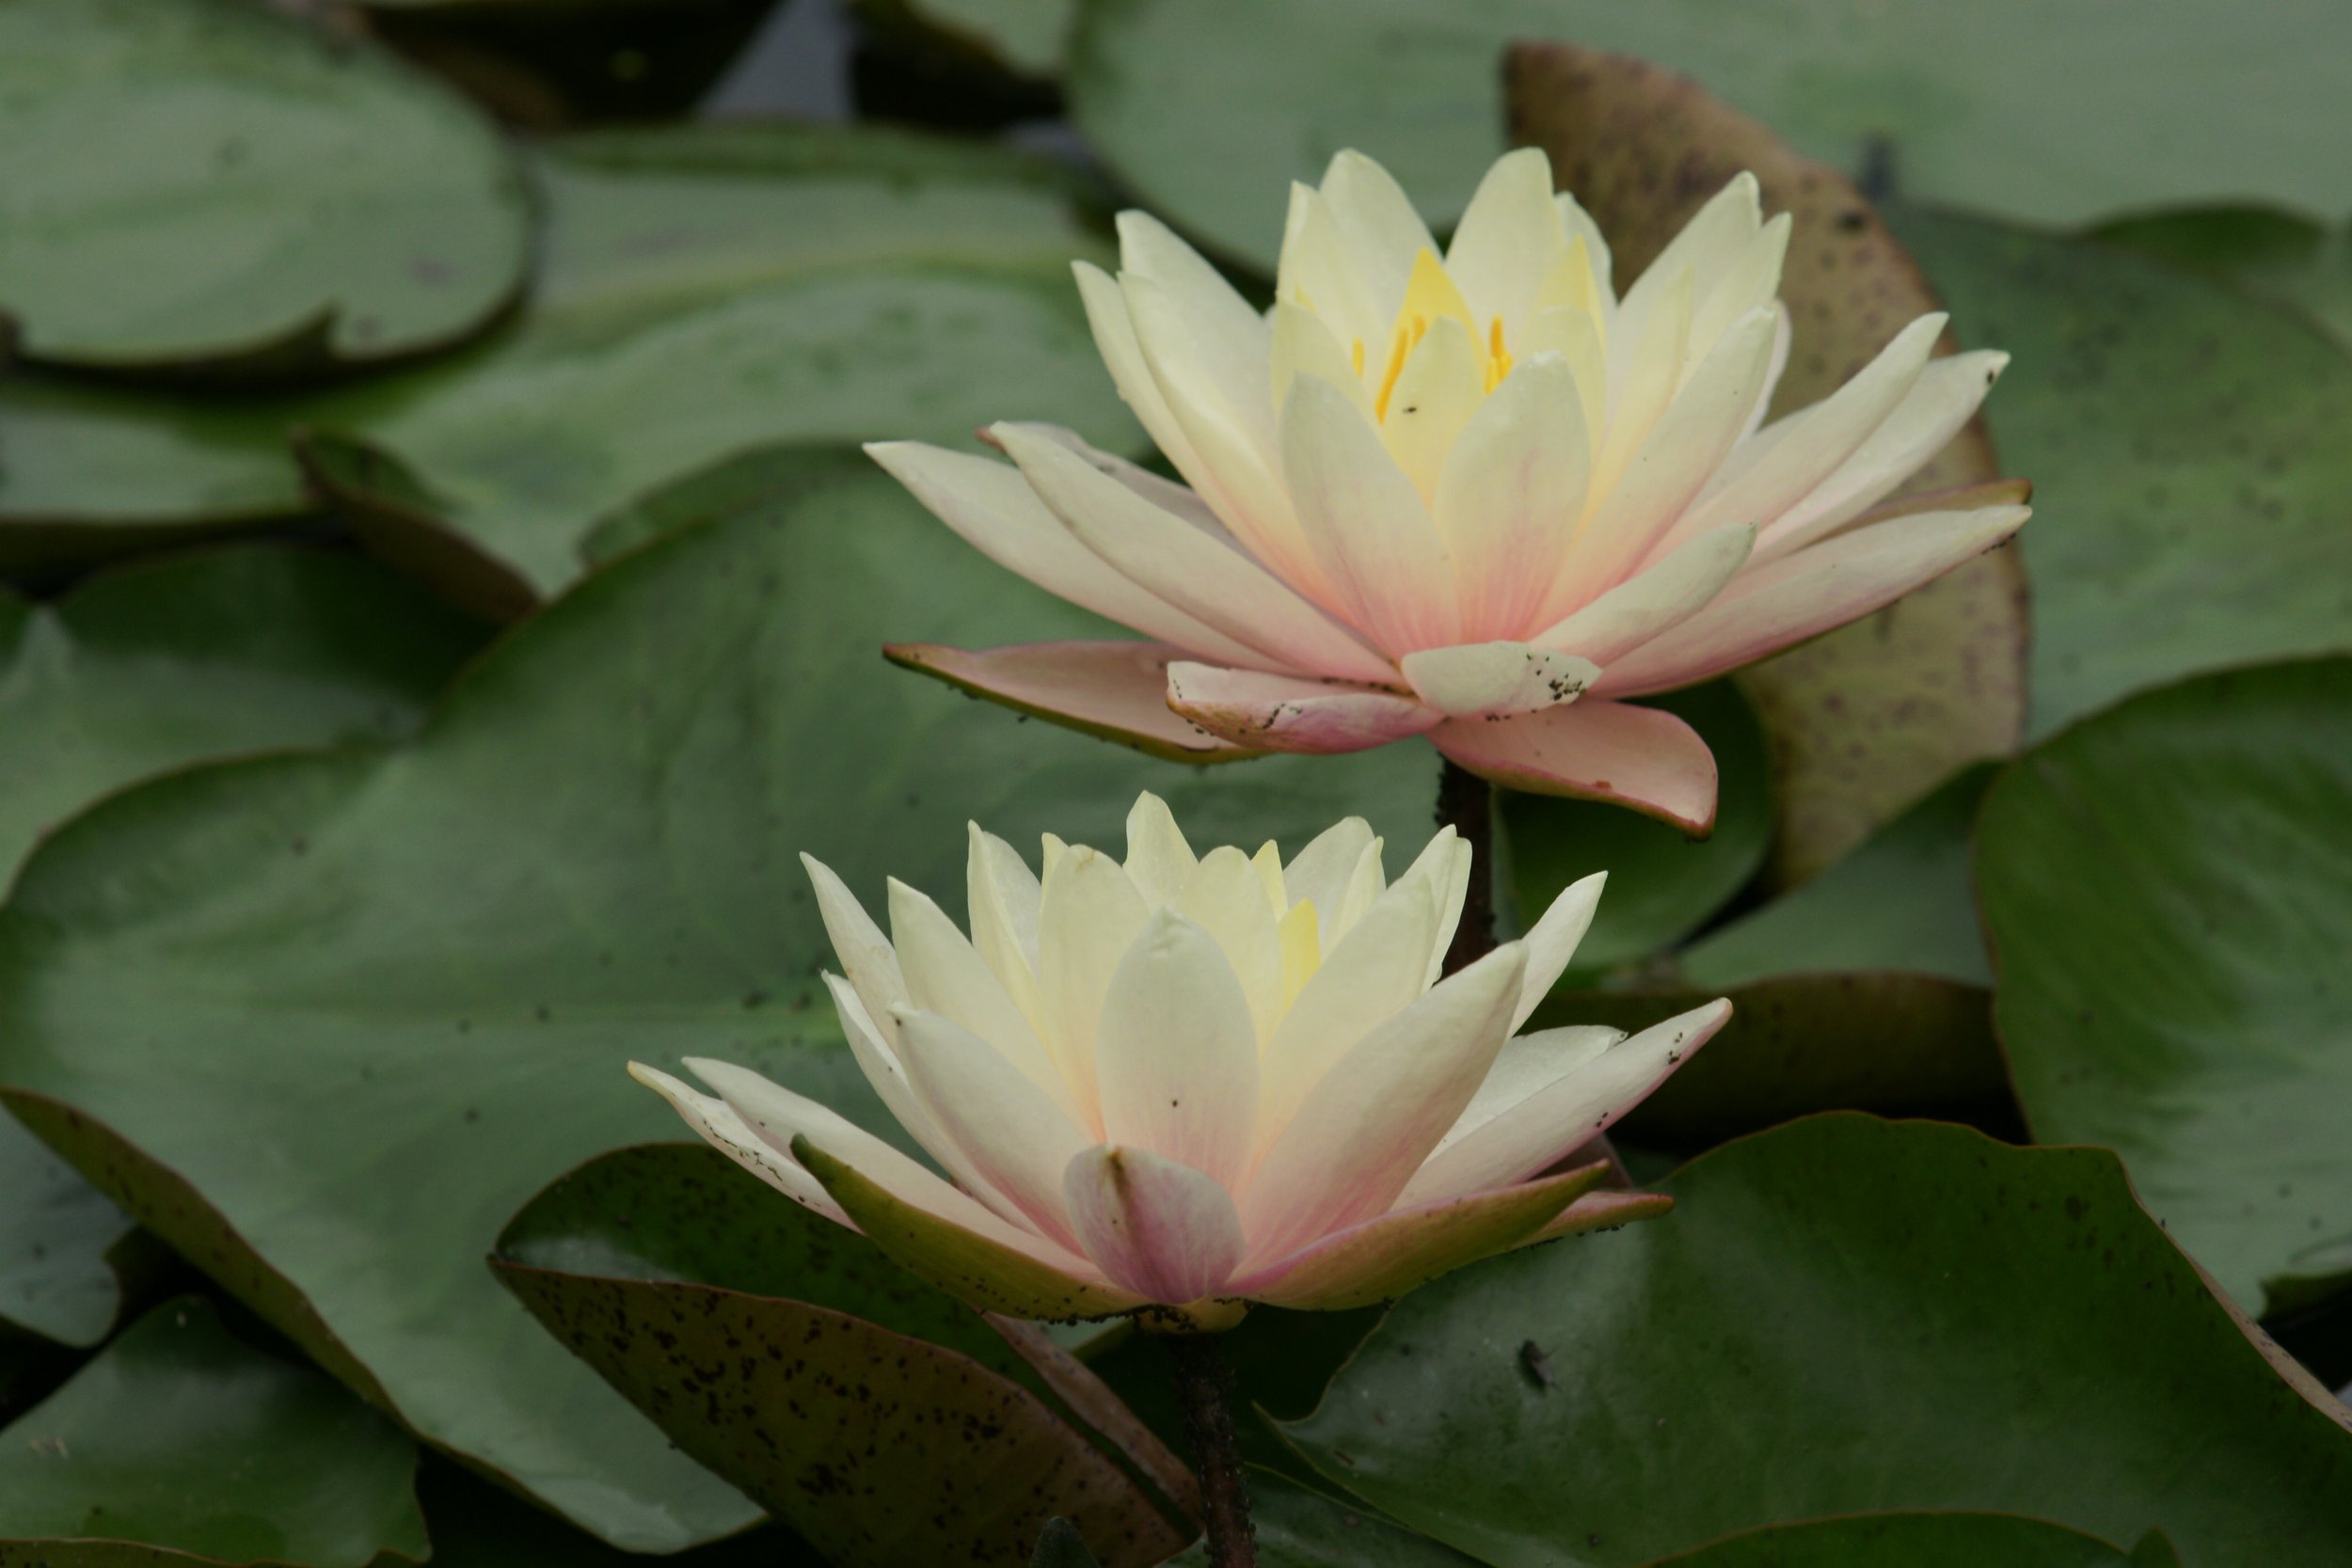  Captured in 2008. Lilies at Karyia Park in Mississauga, ON (my first time using a DSLR and the day everything changed!) 